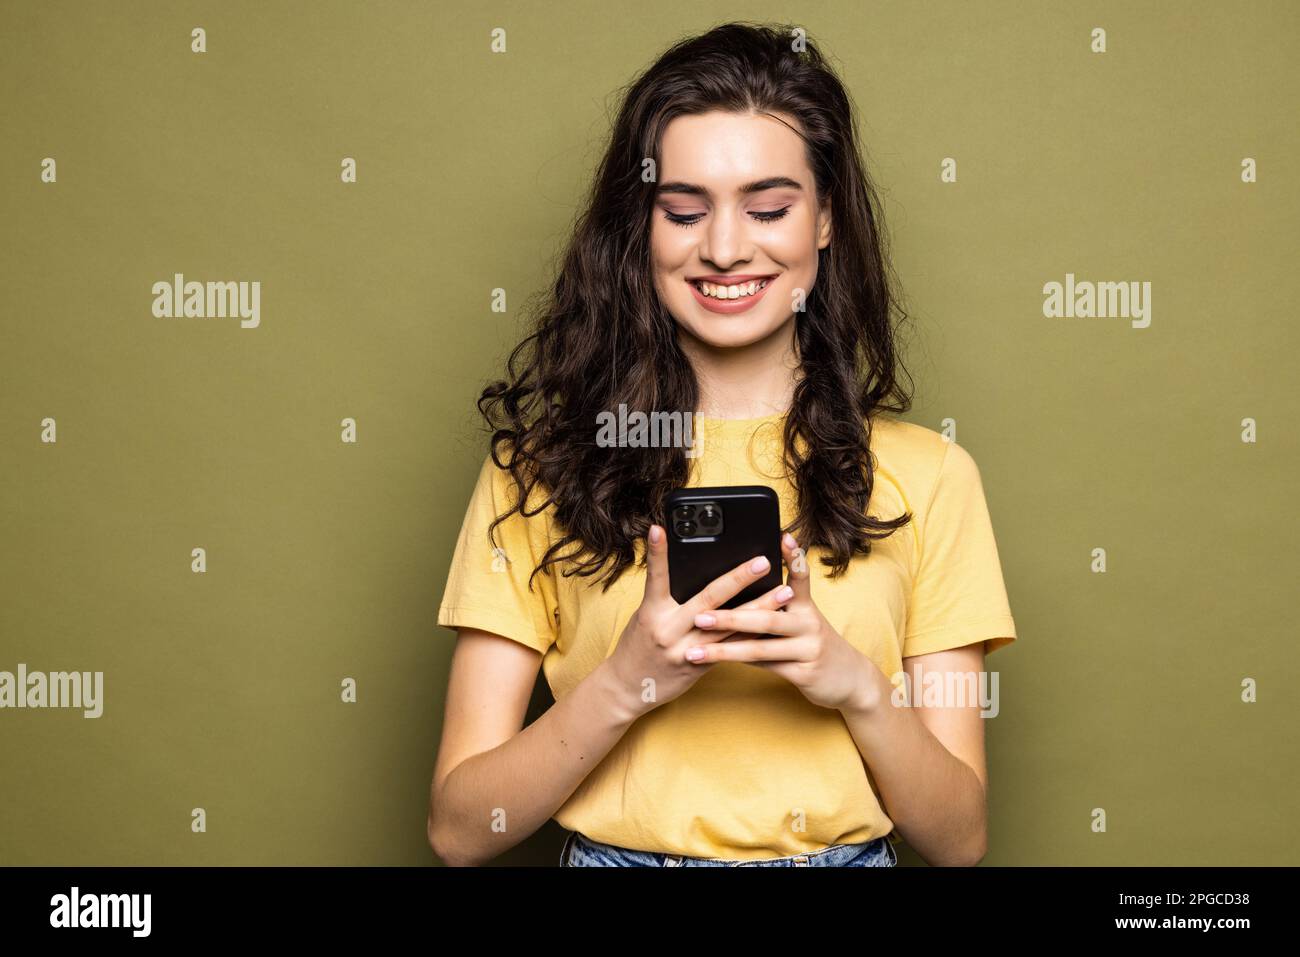 Young woman hold in hand use mobile cell phone typing read message isolated on khaki background studio portrait. People lifestyle concept Stock Photo